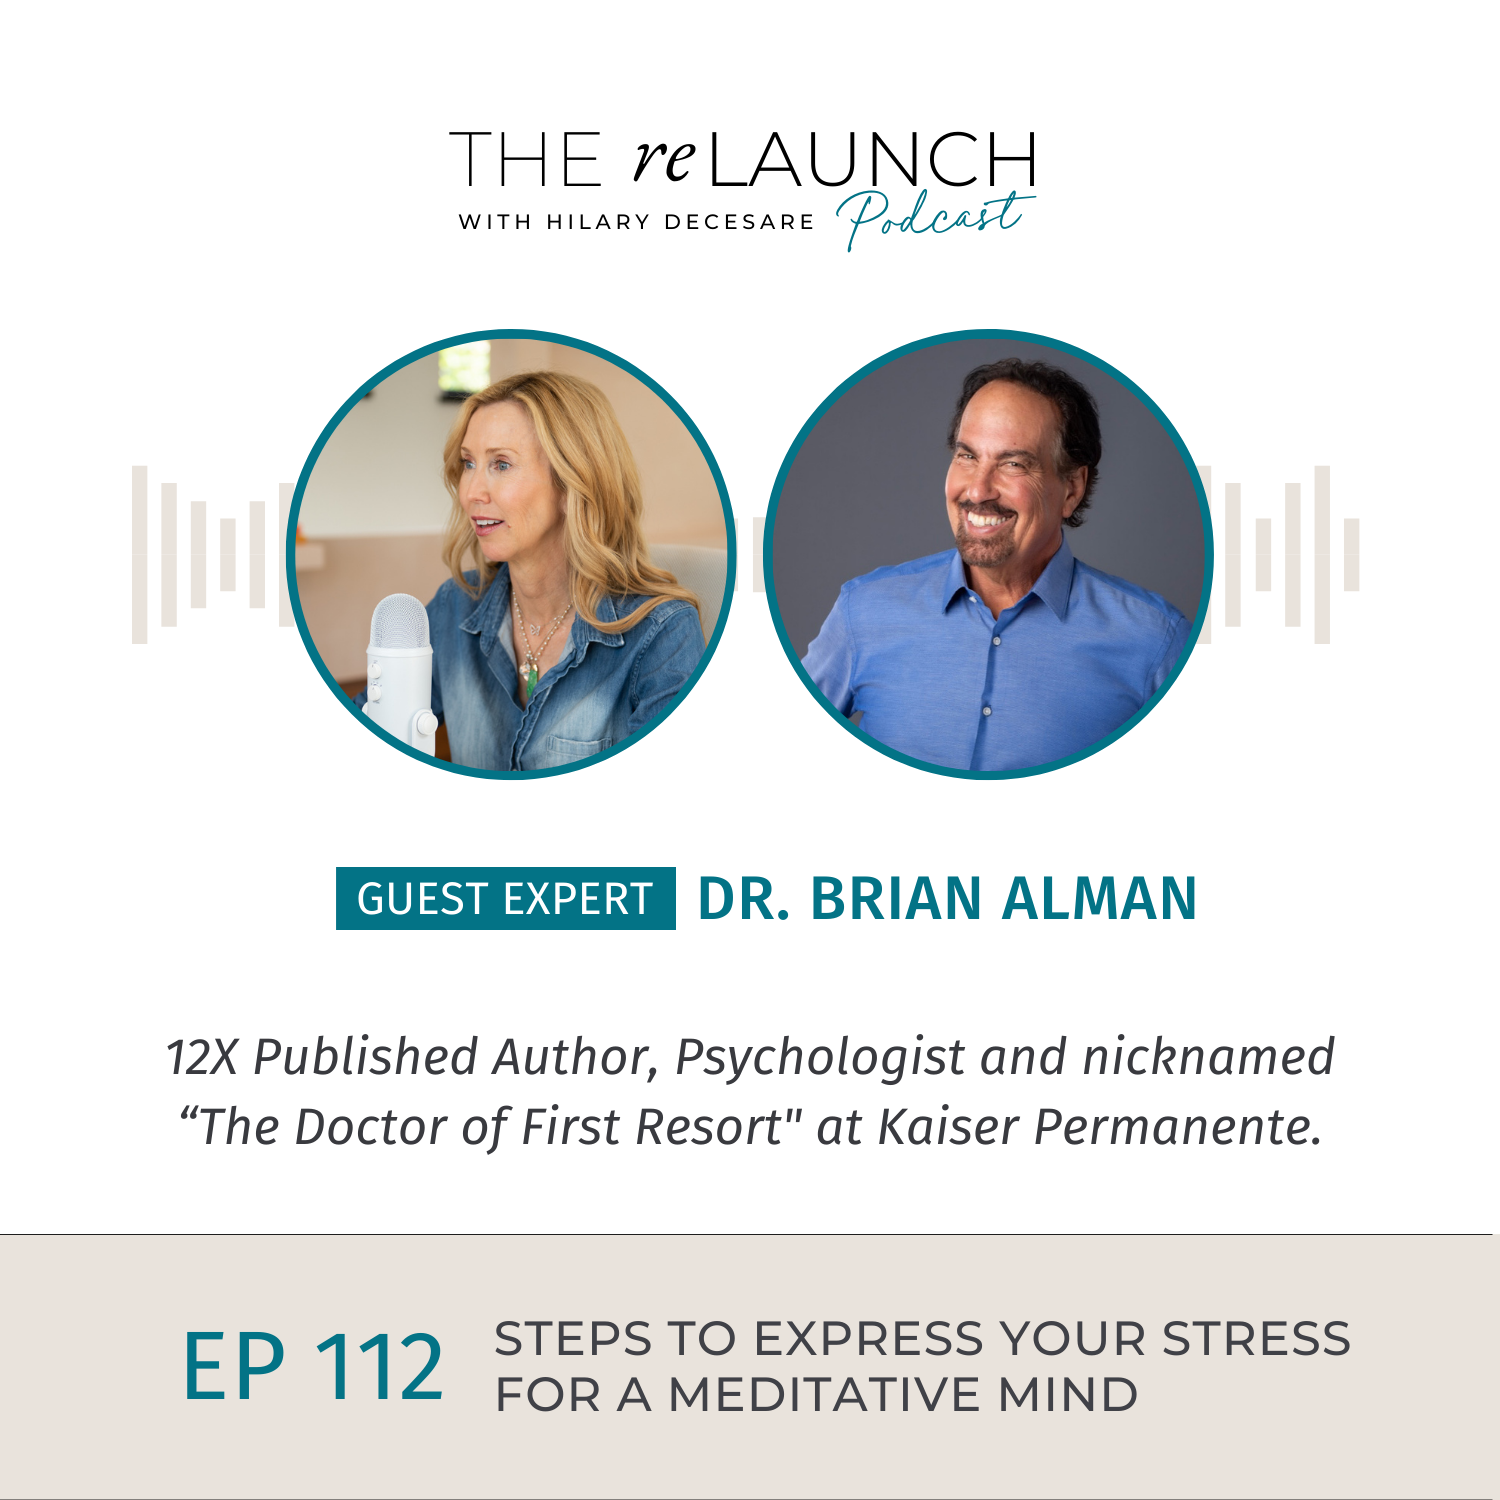 The Benefits of Expressing Your Stress with Dr. Brian Alman EP112